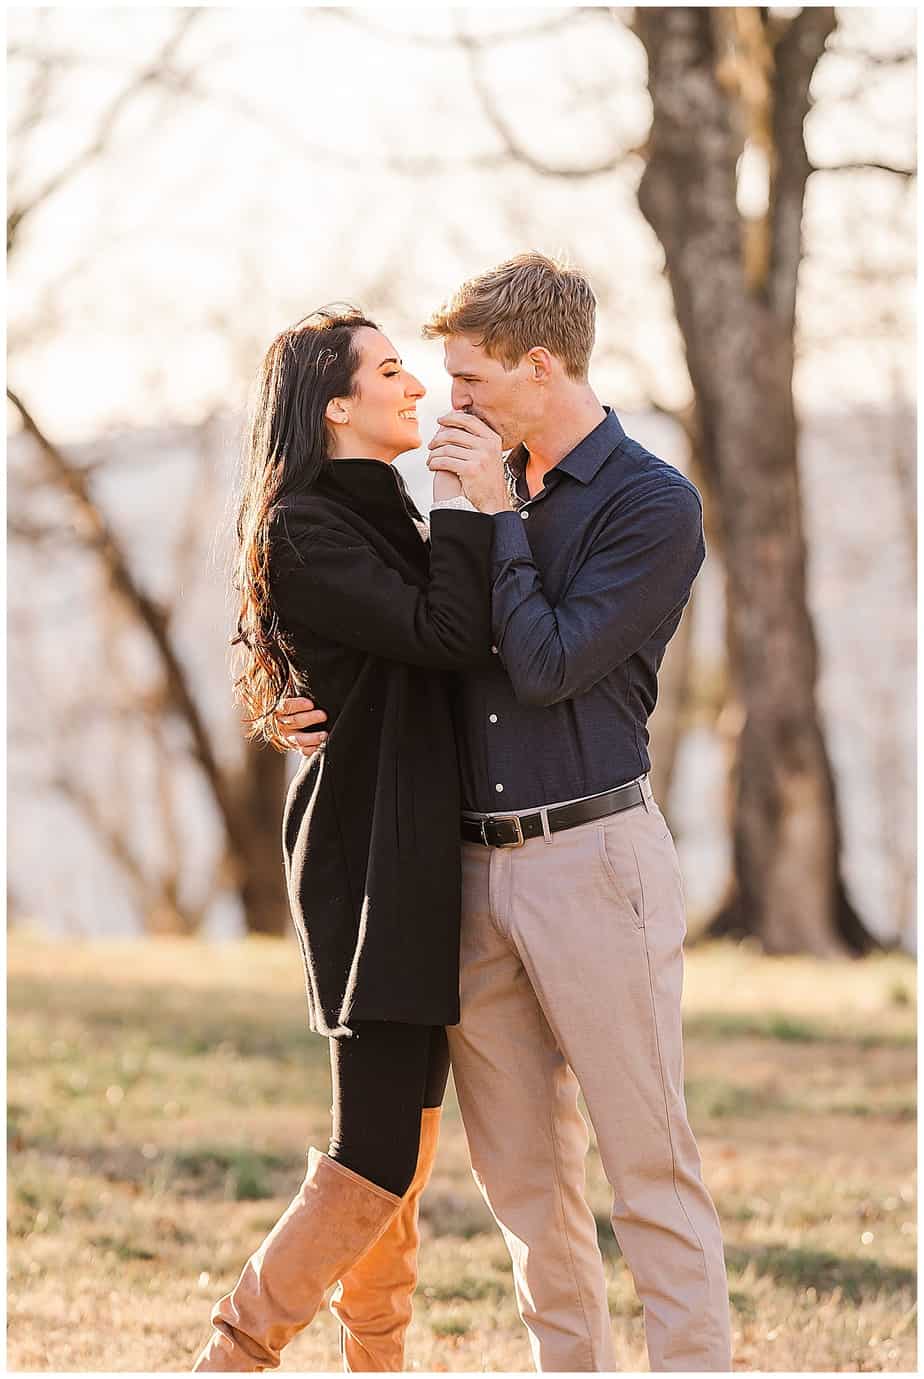 Engagement session in point park